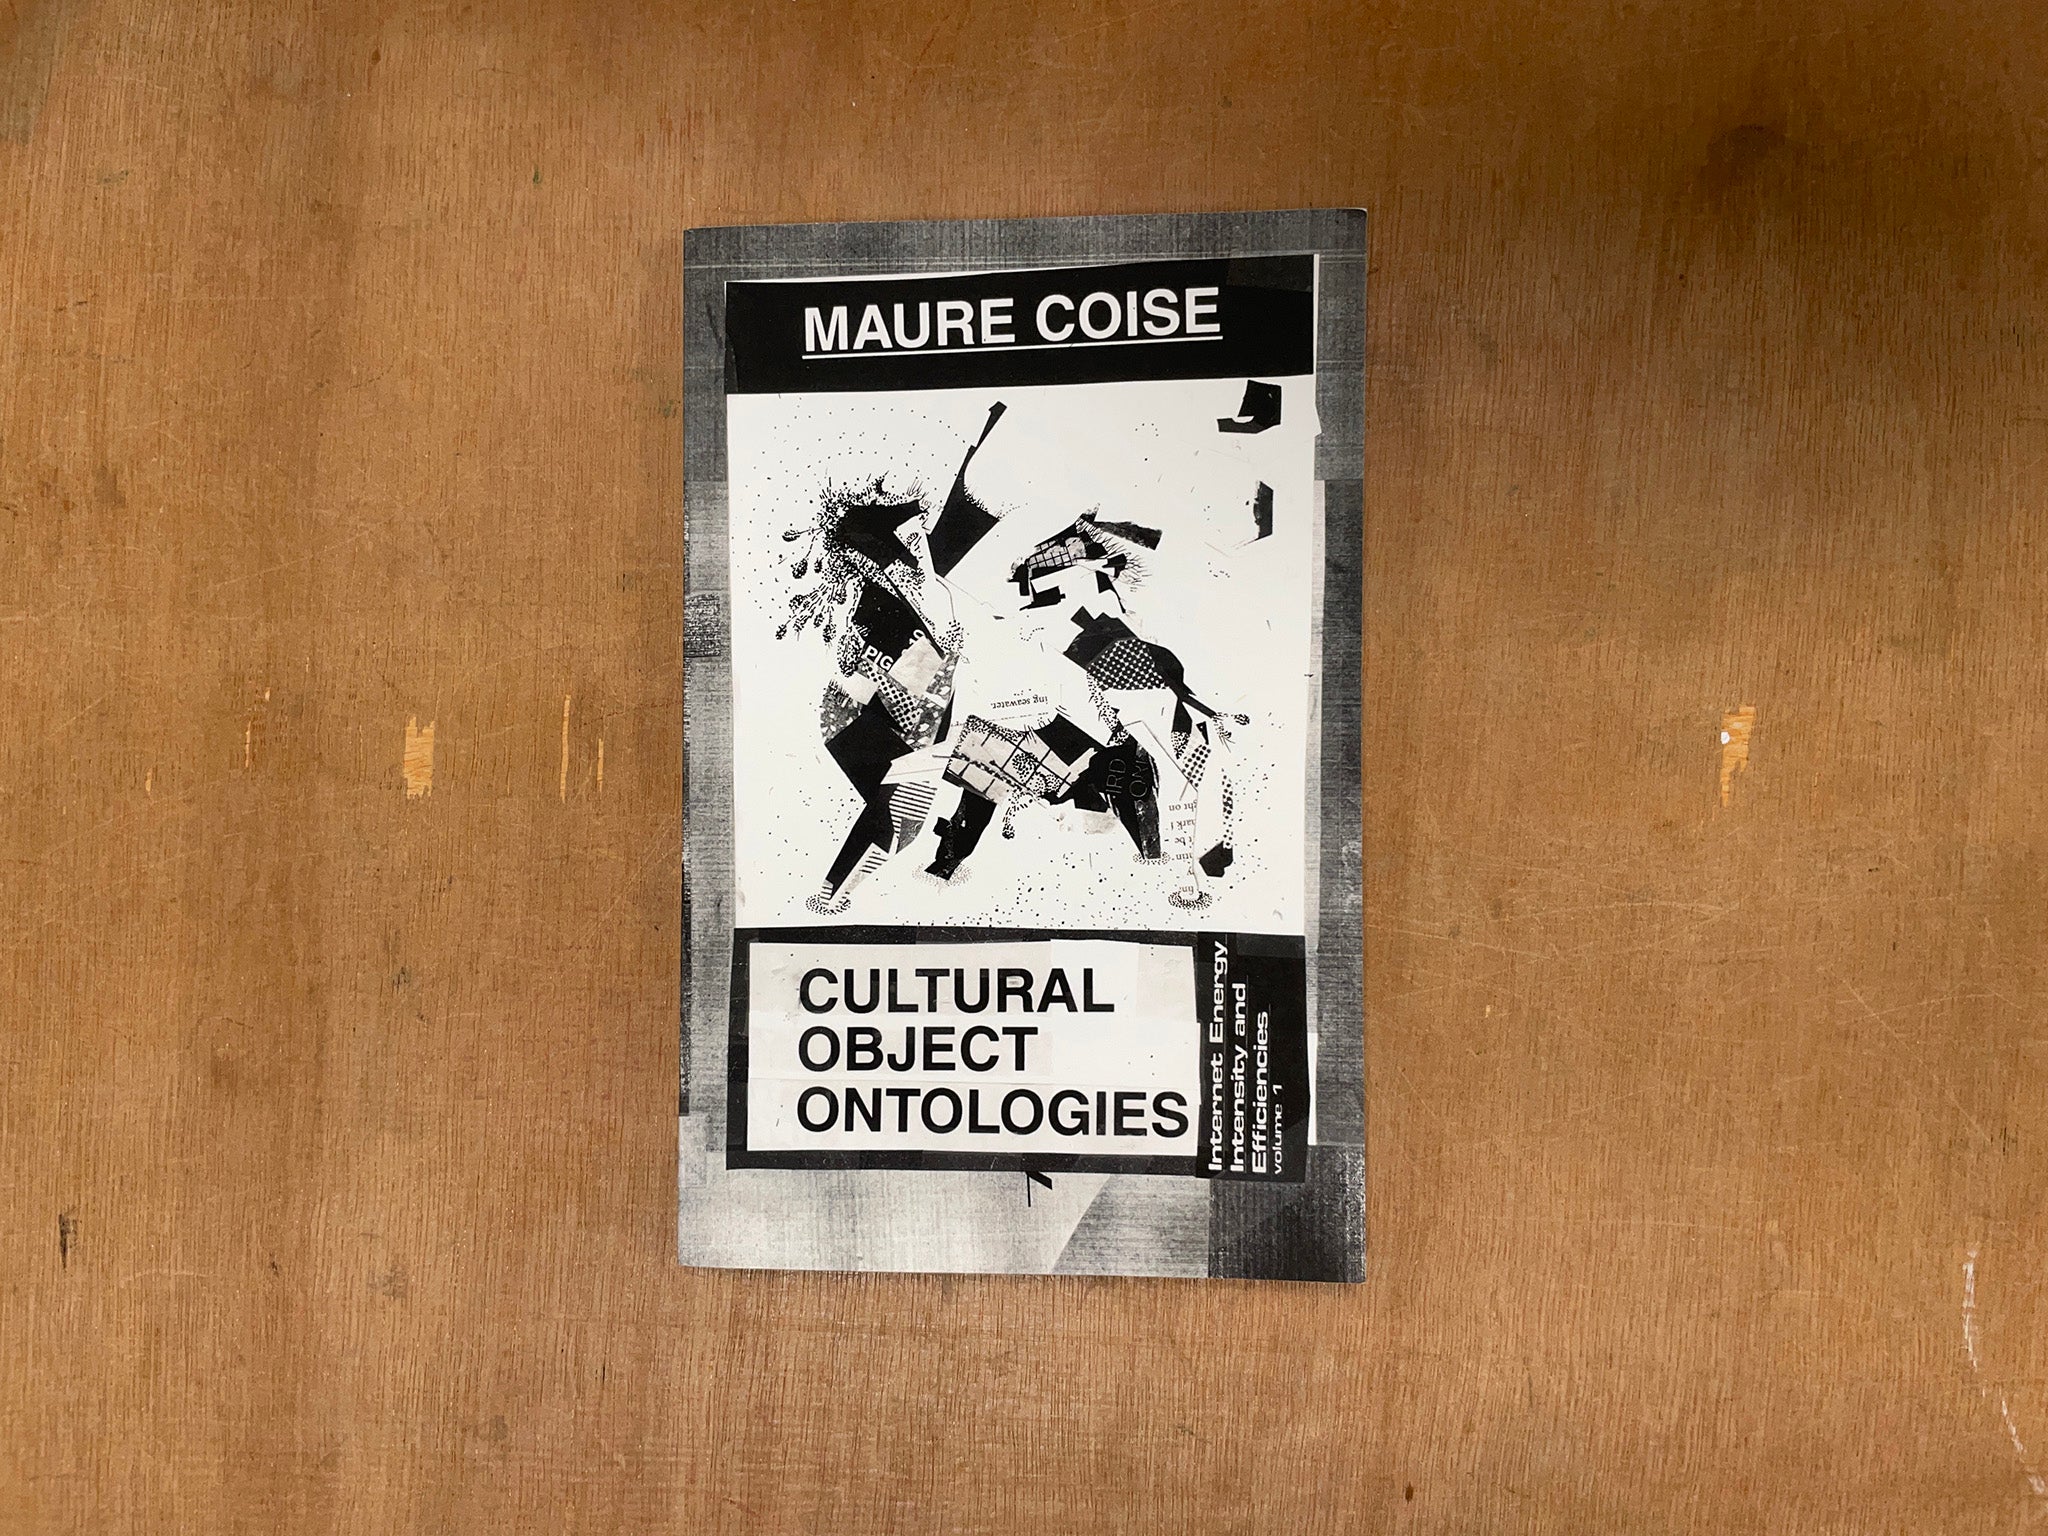 CULTURAL OBJECT ONTOLOGIES by Maure Coise